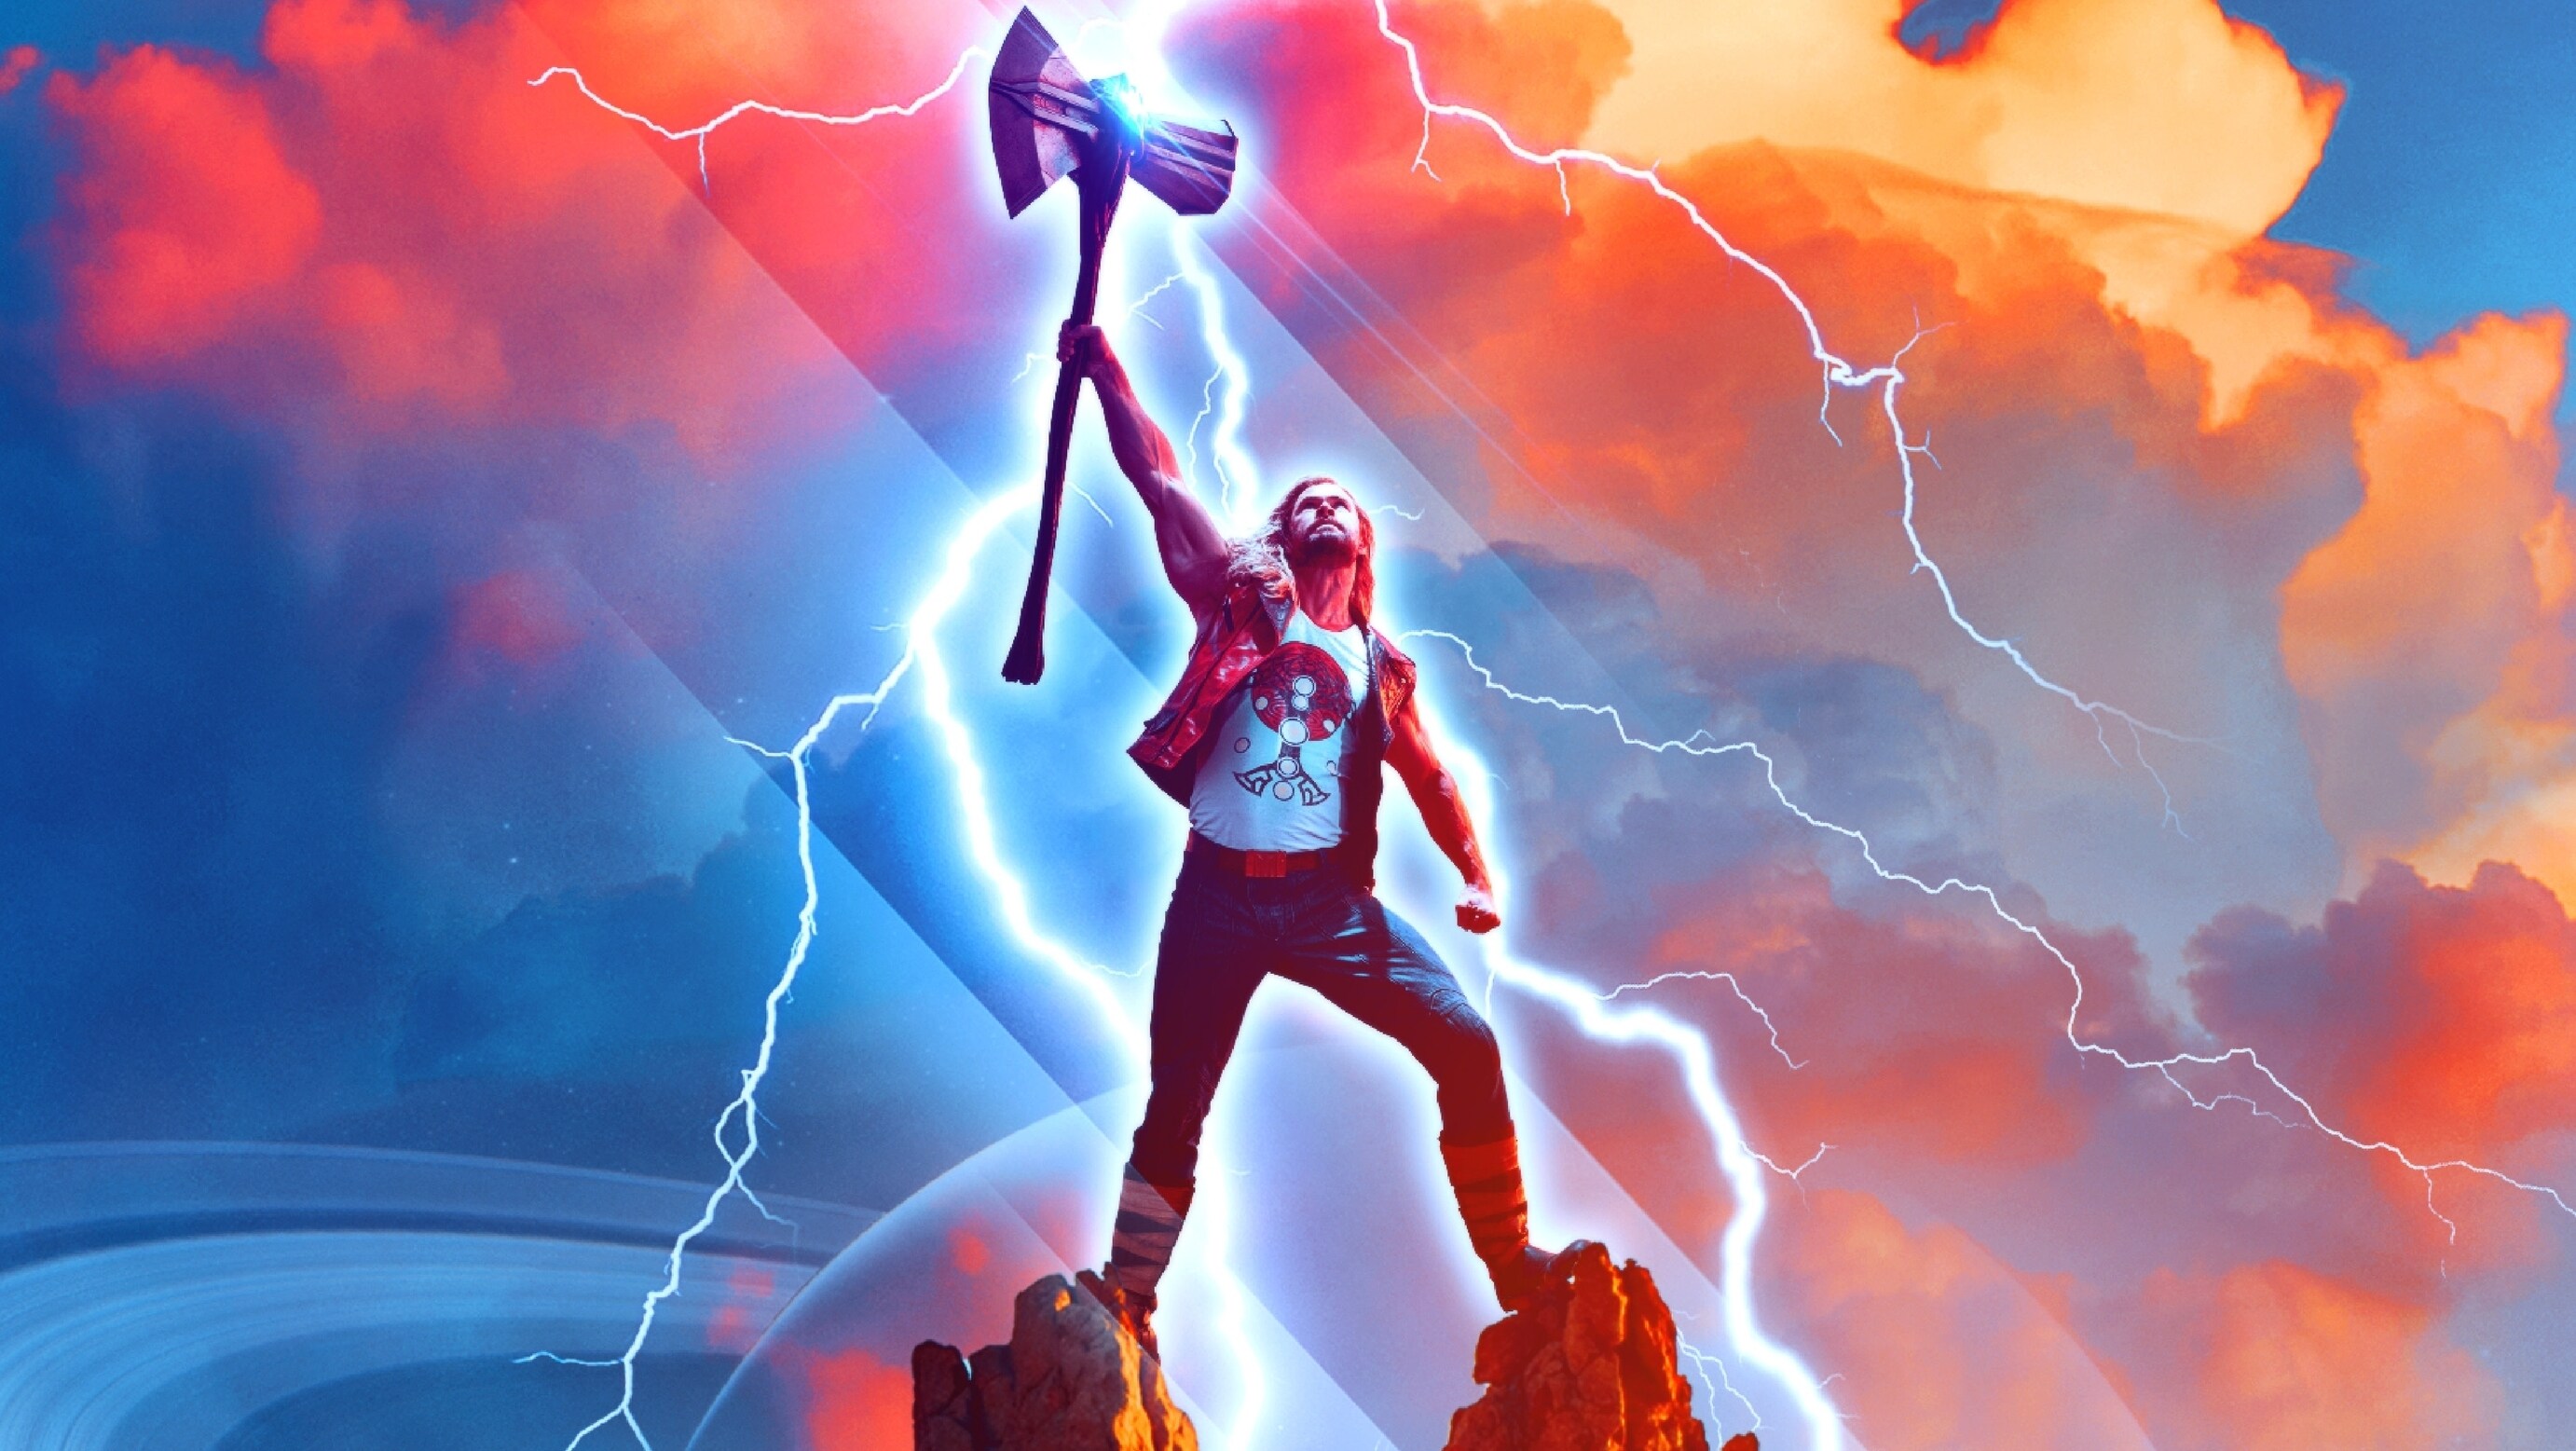 Marvel Studios’ “Thor: Love and Thunder” – Teaser Trailer and Poster Now Available